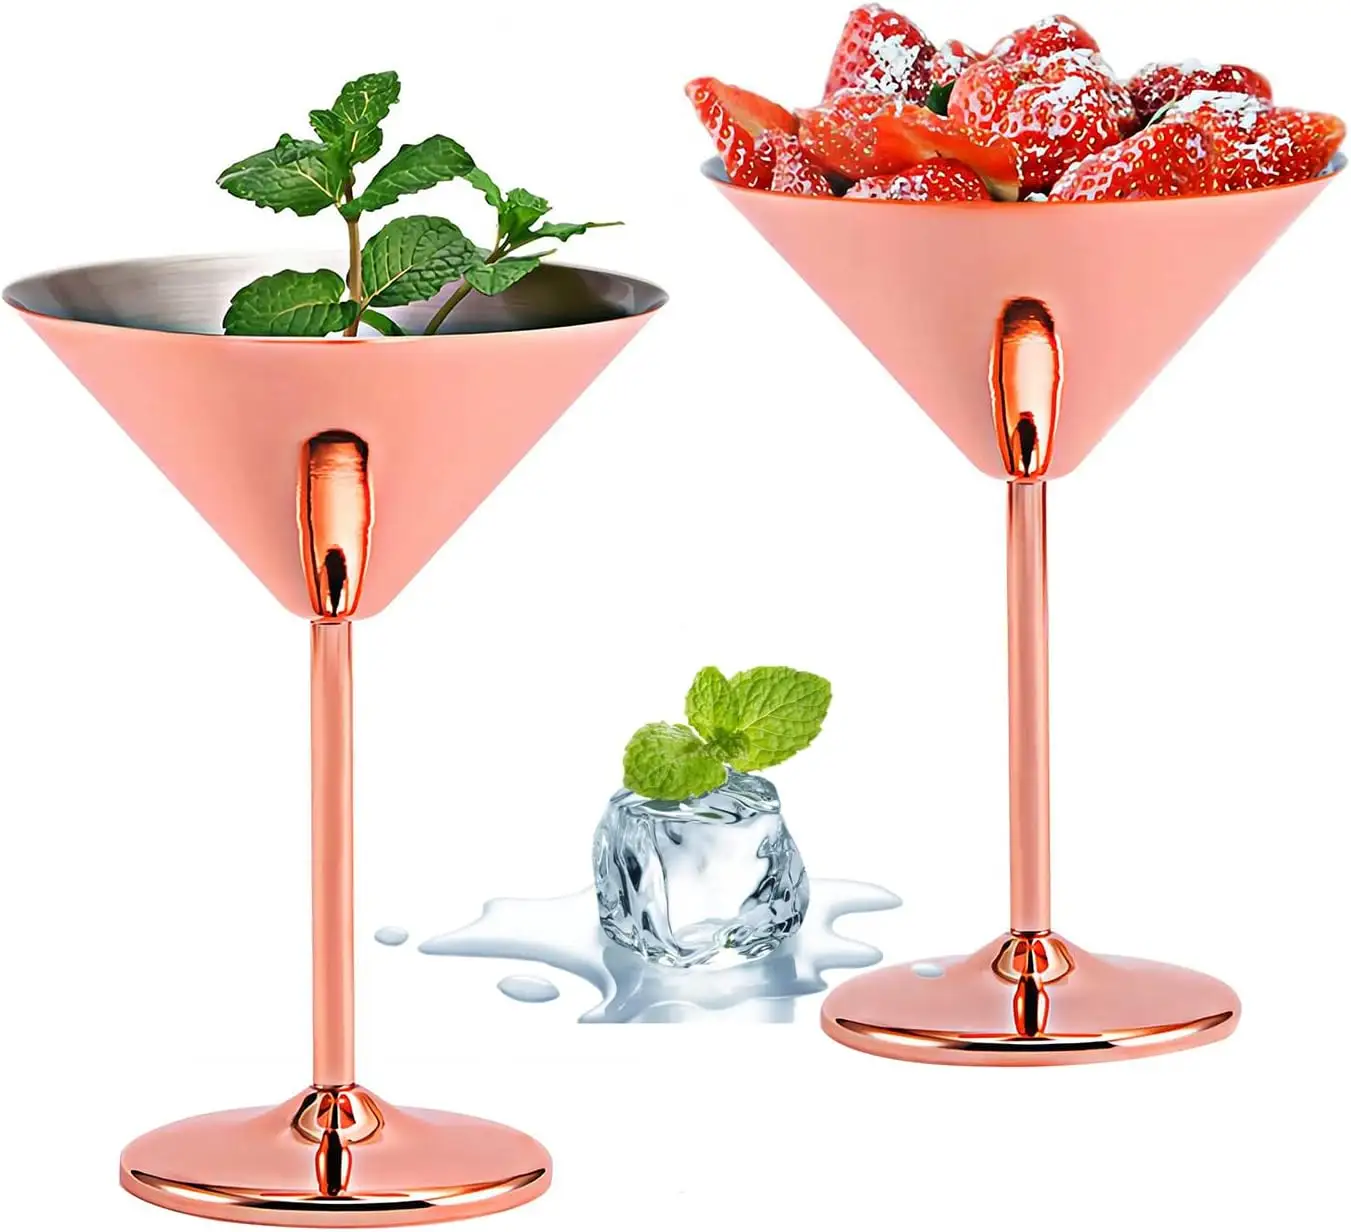 Made in India Cocktail Glasses Metal Drinking Cup Red Wine Glass Goblet Stainless Steel Martini Glasses Wholesale Sale